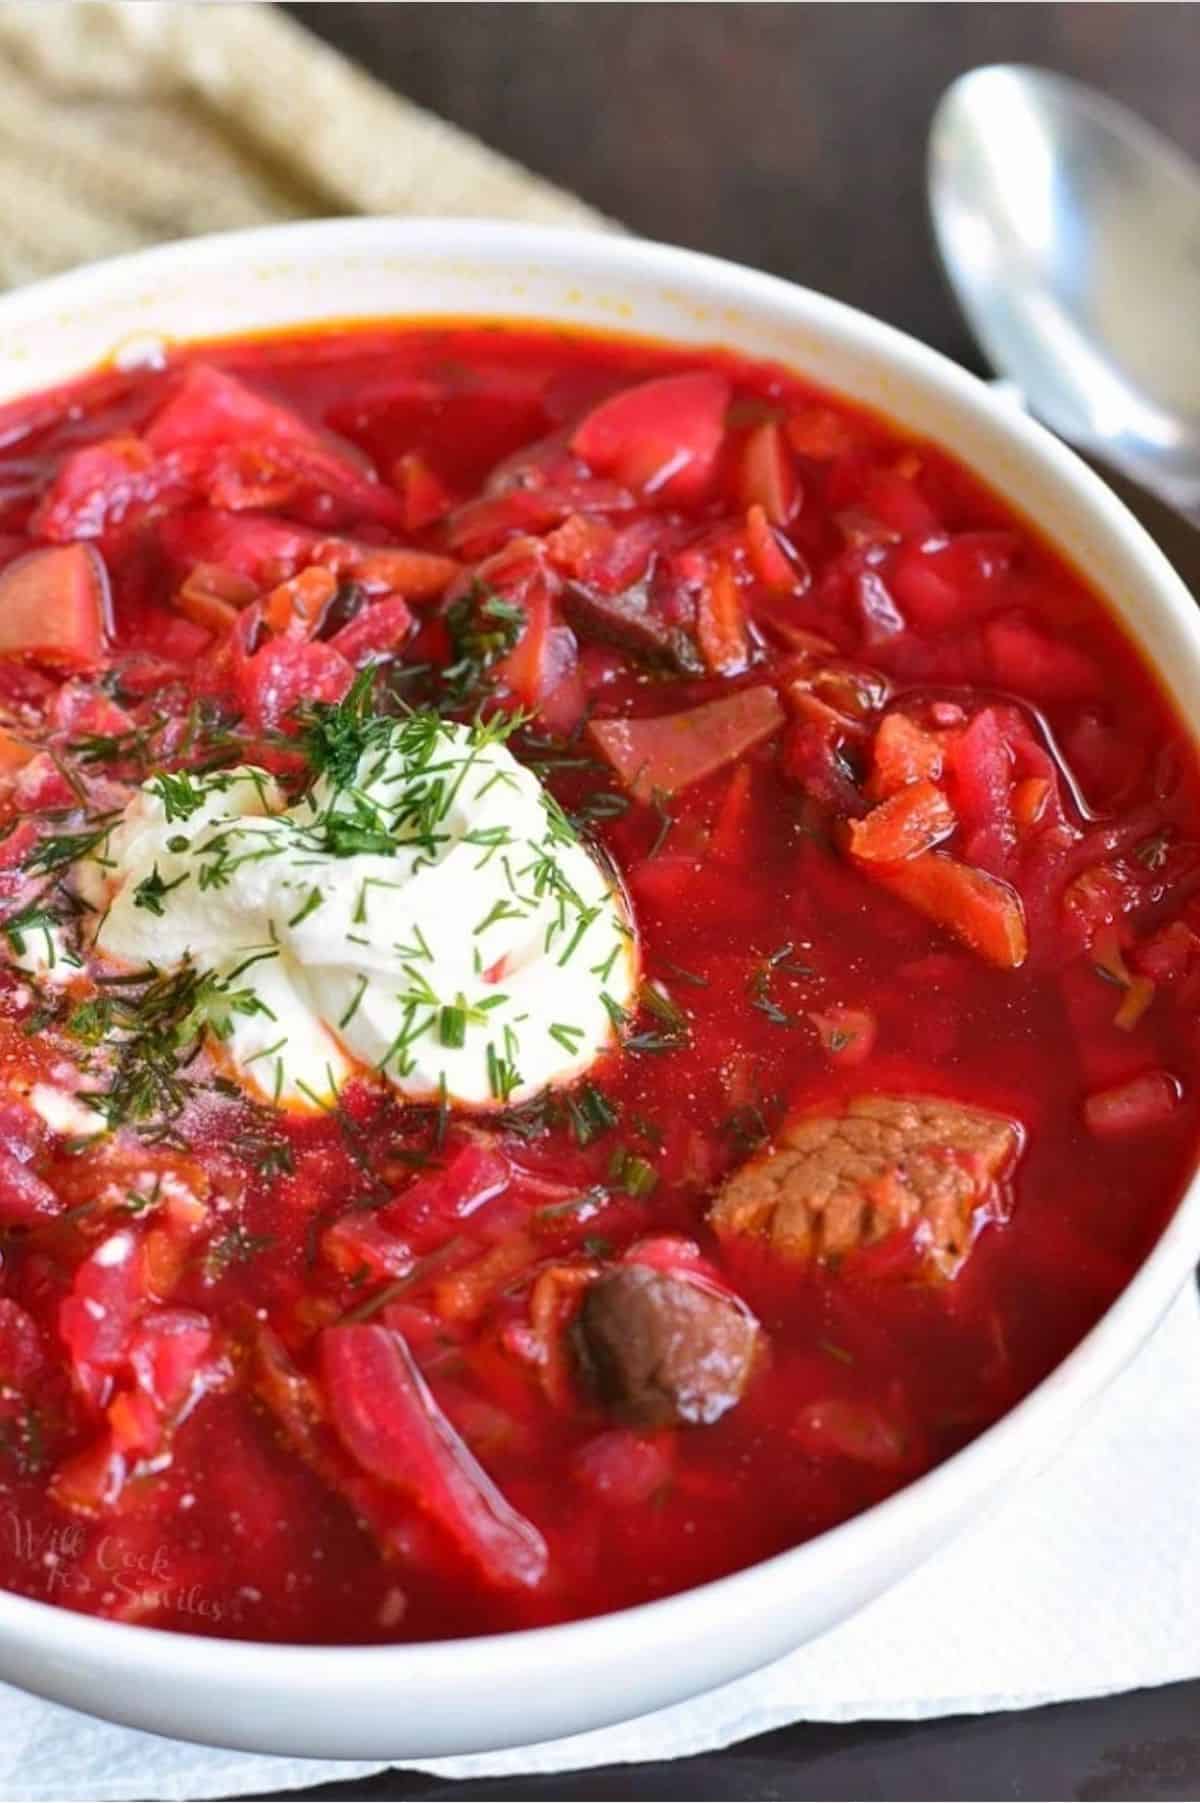 Borscht soup in a bowl with a dollop of sour cream on top and herbs as garnish.